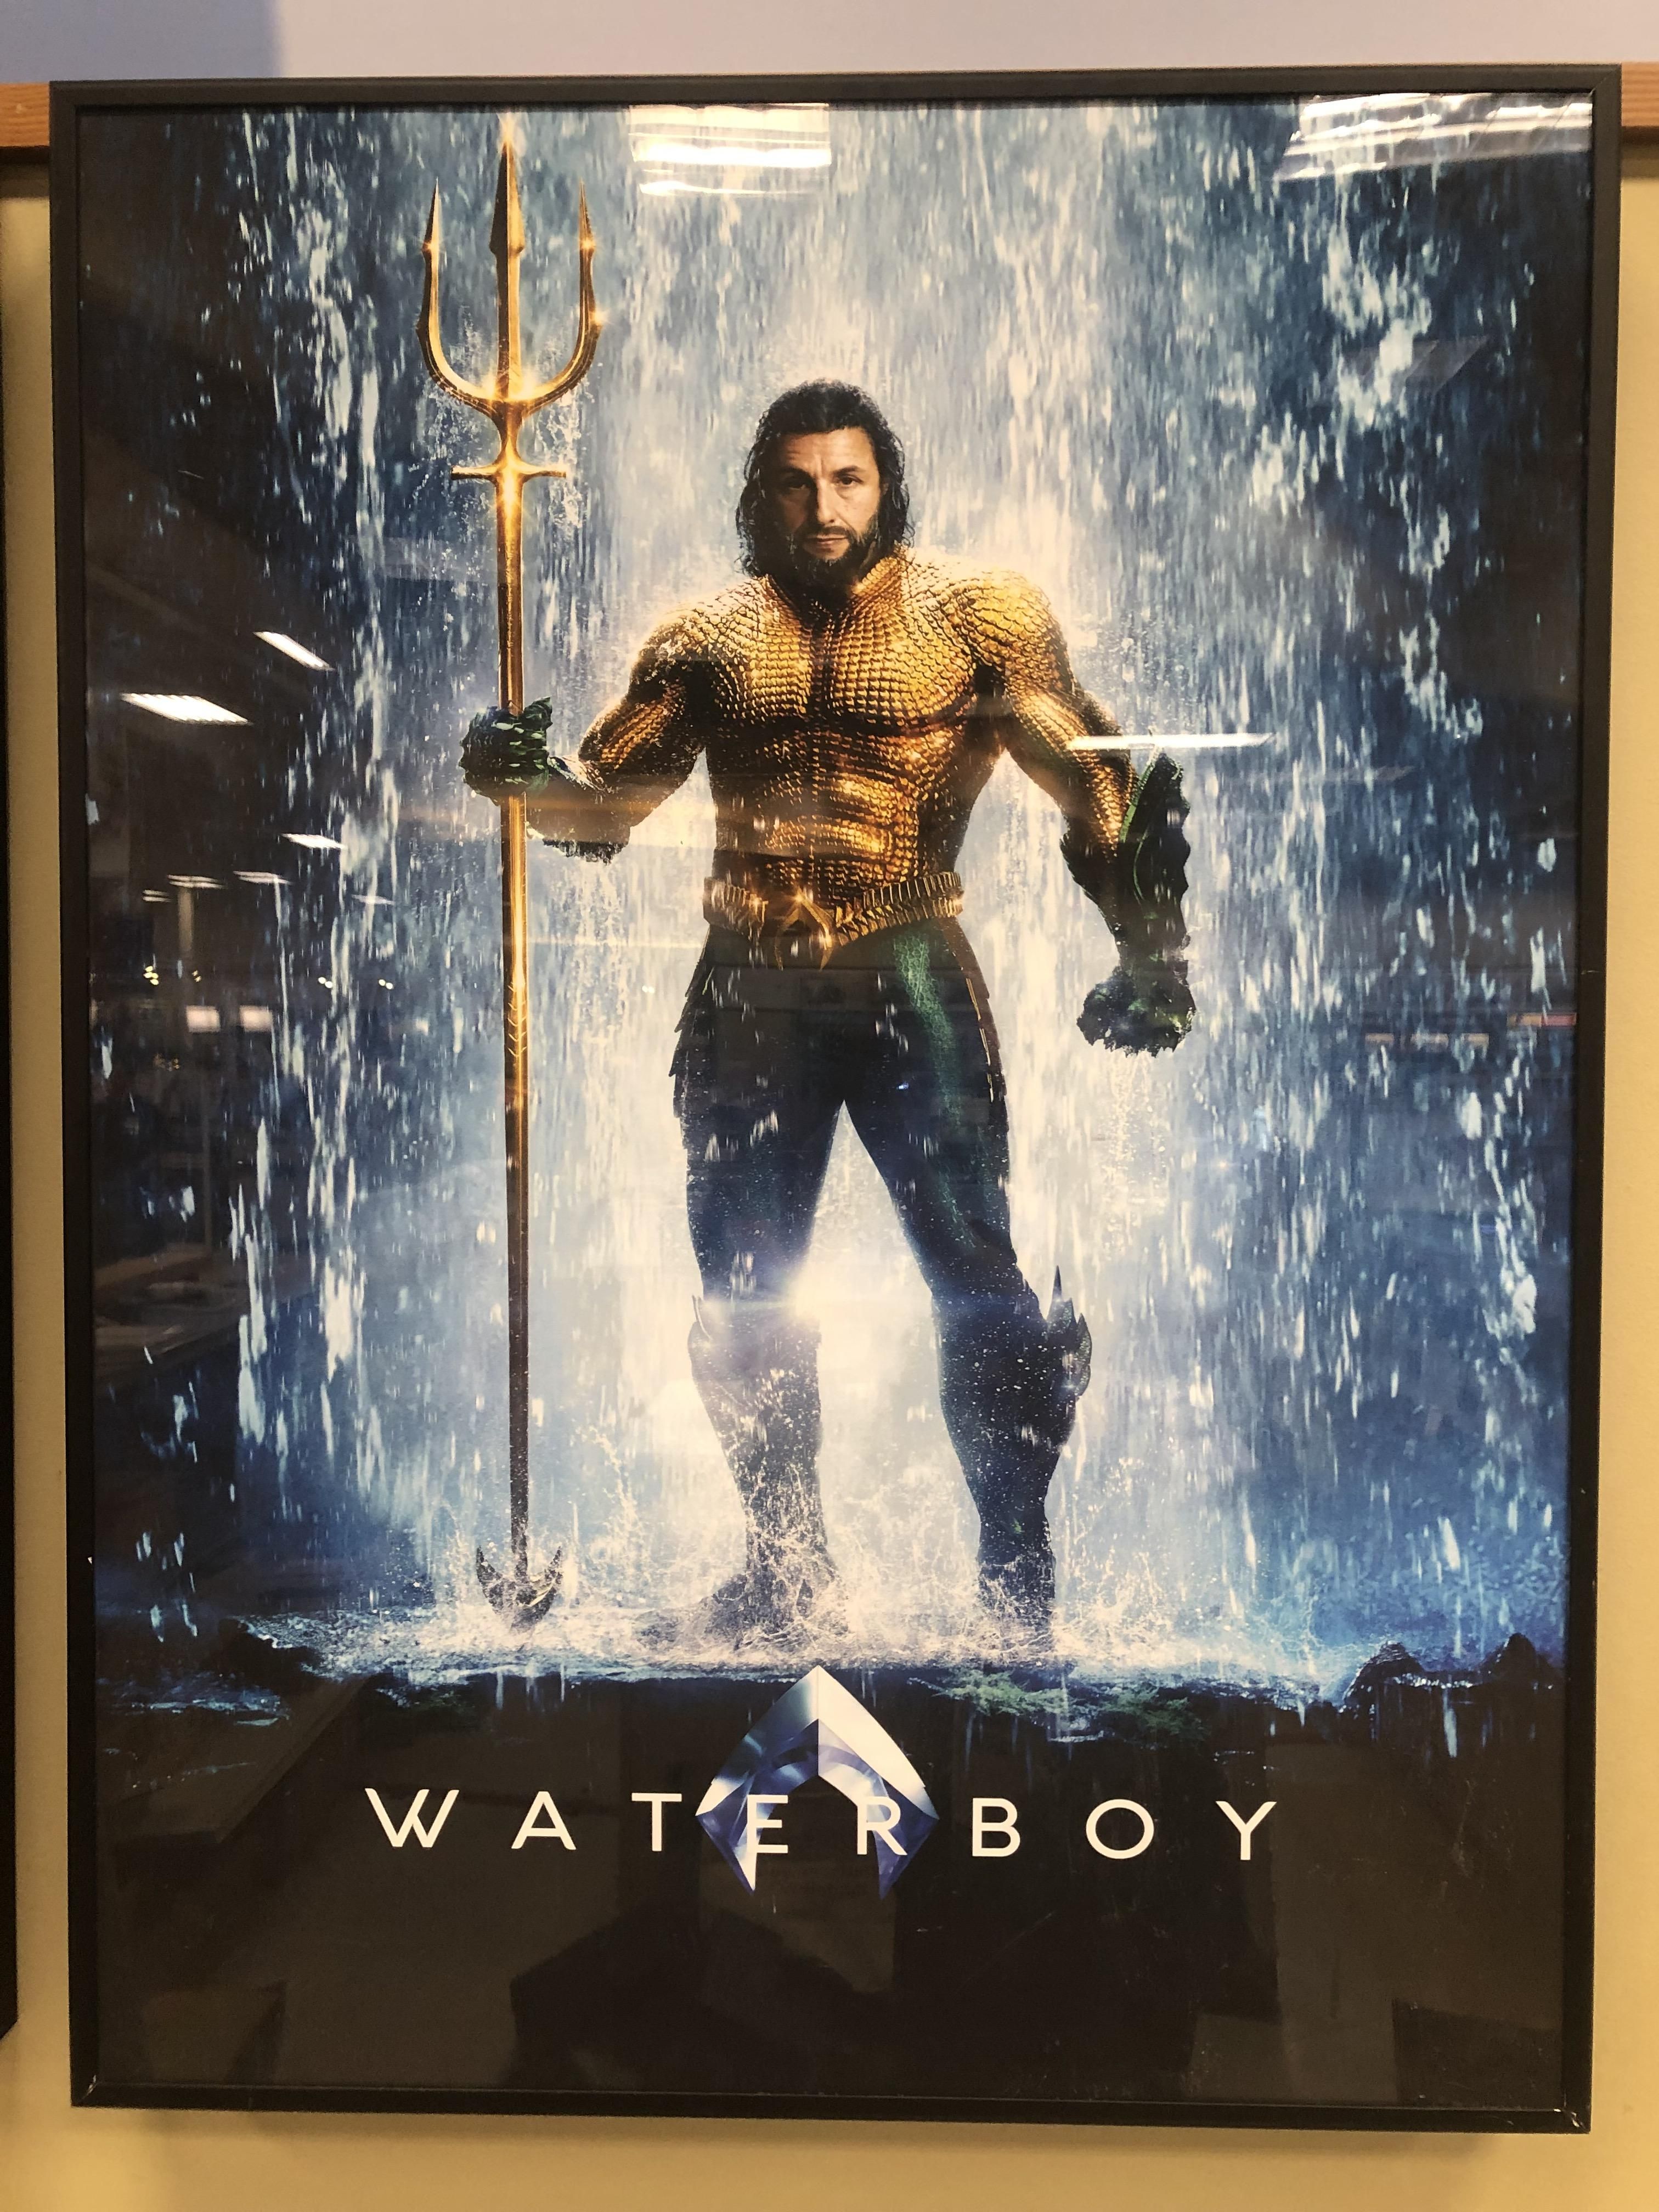 My coworker changed up the Aquaman poster today.